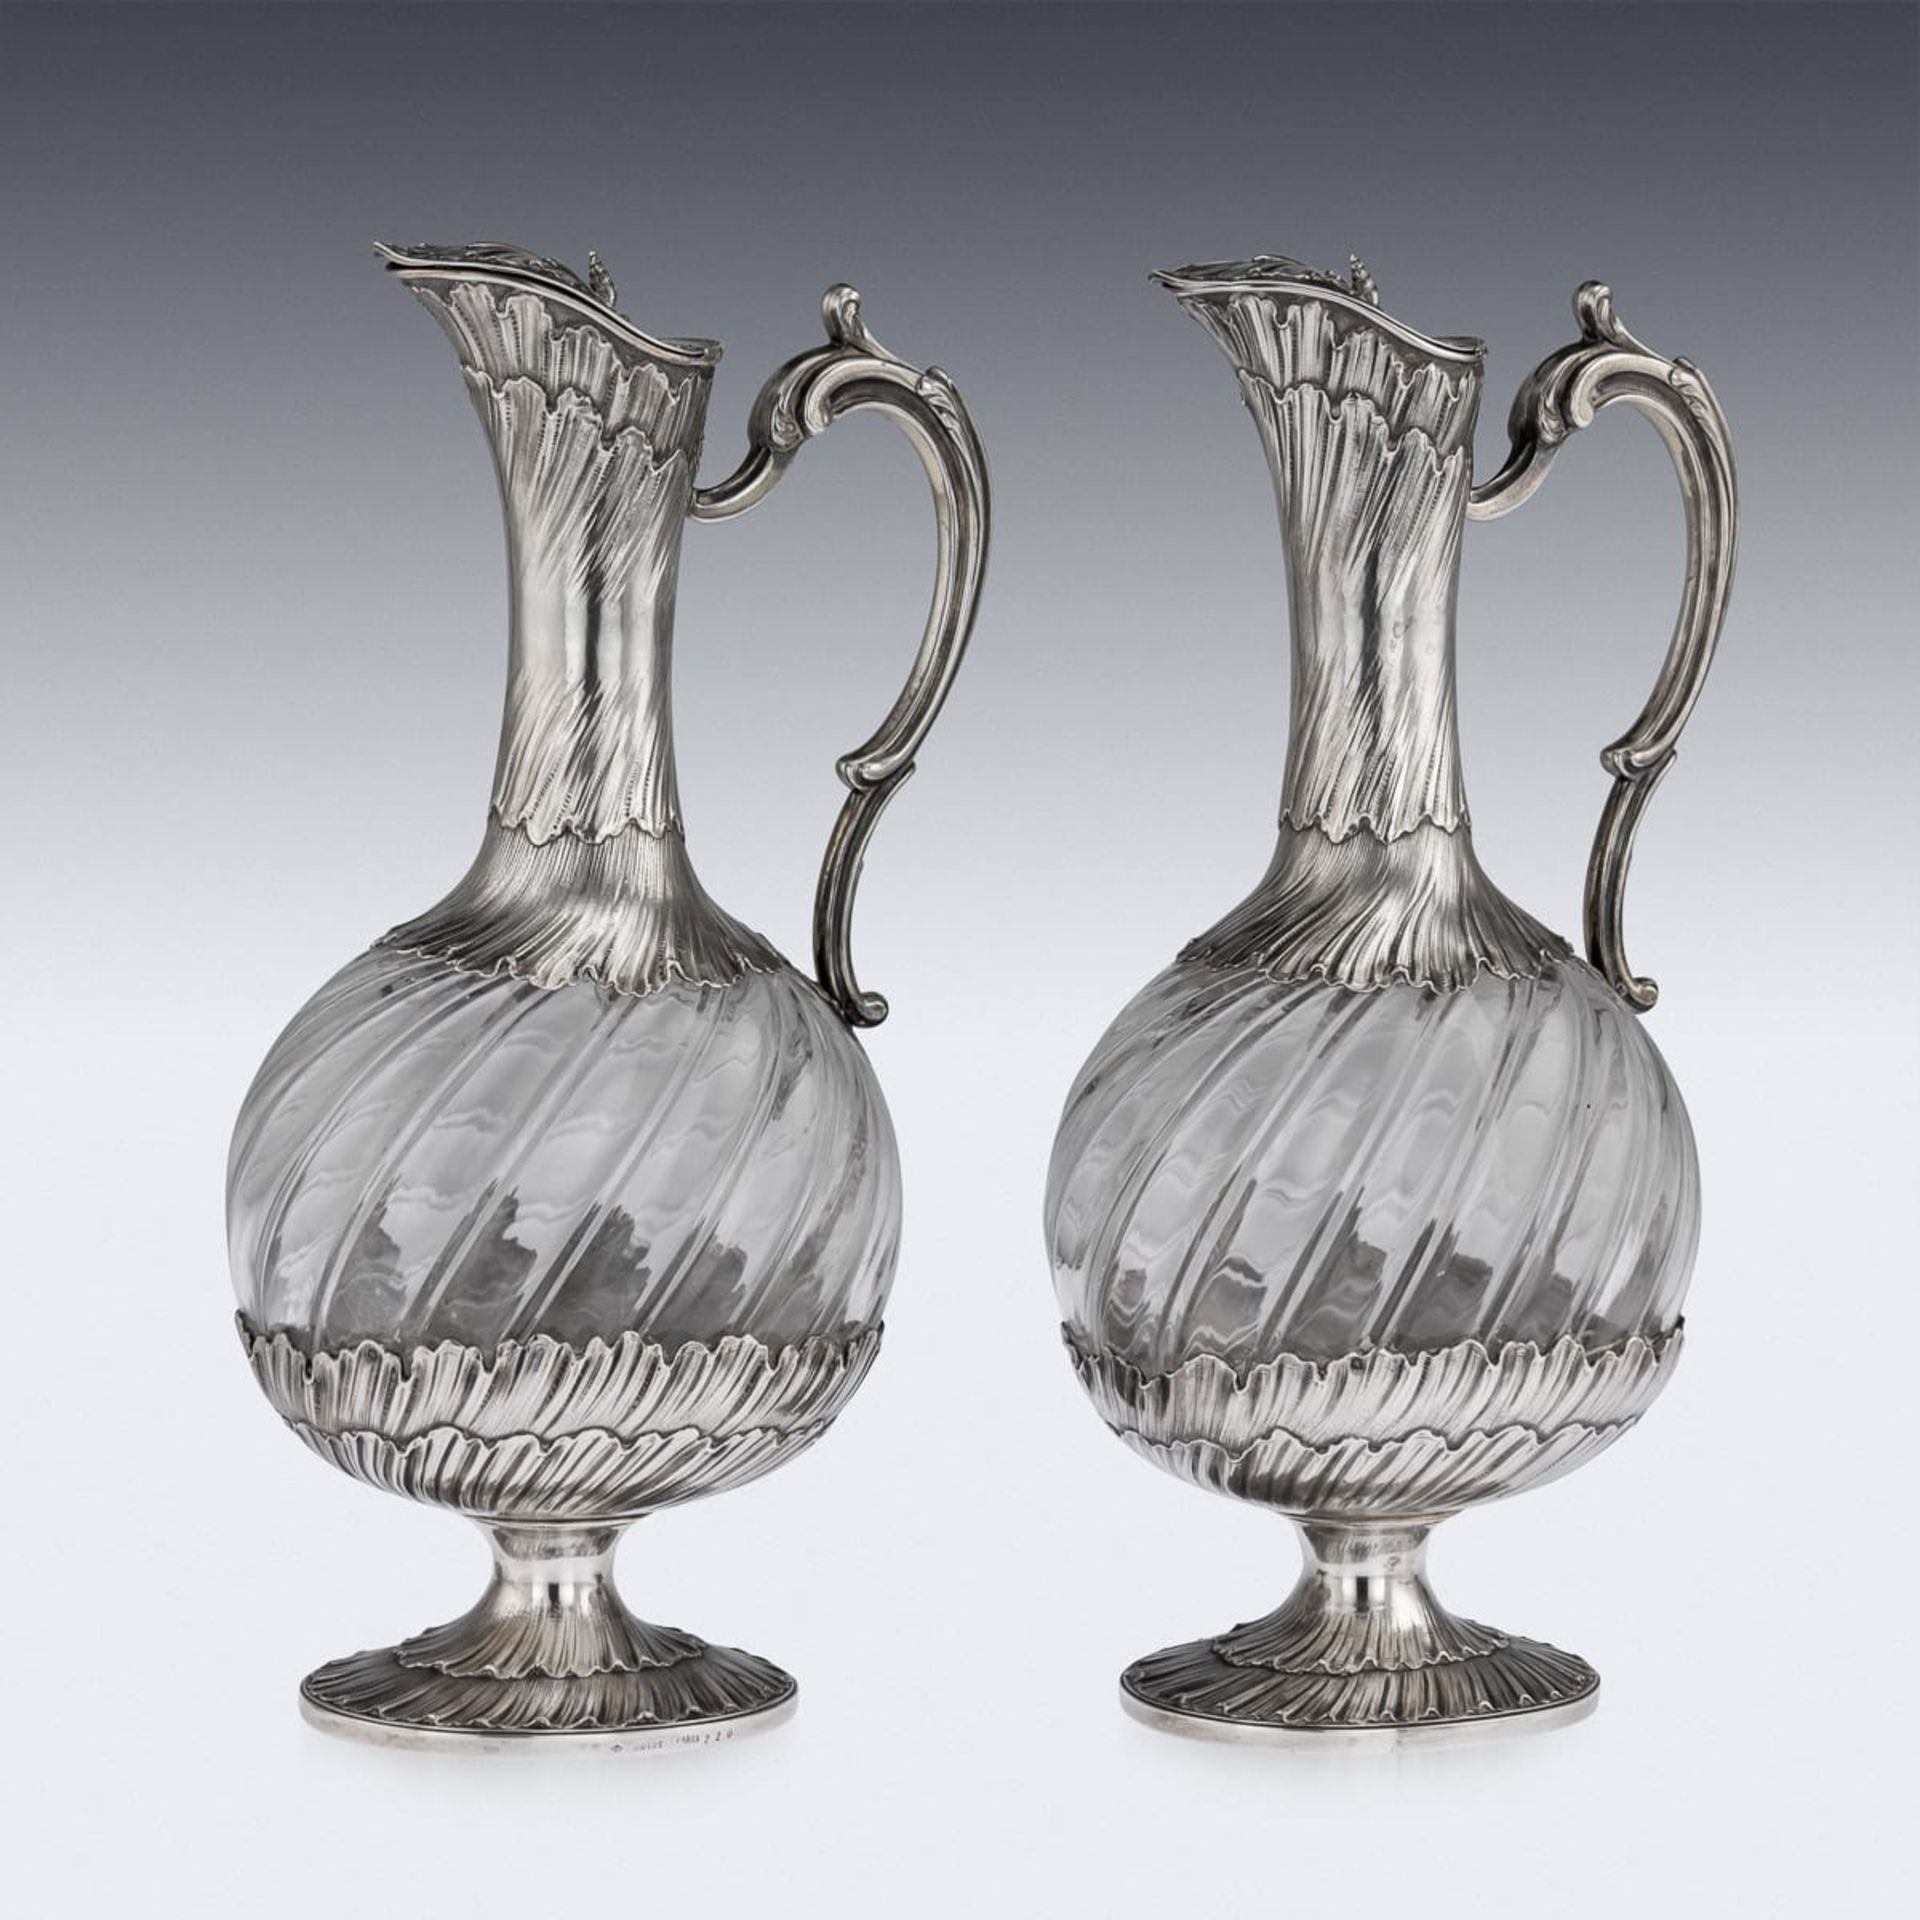 MAISON ODIOT: A PAIR OF 19TH CENTURY SILVER AND GLASS CLARET JUGS CIRCA 1890 - Image 6 of 16